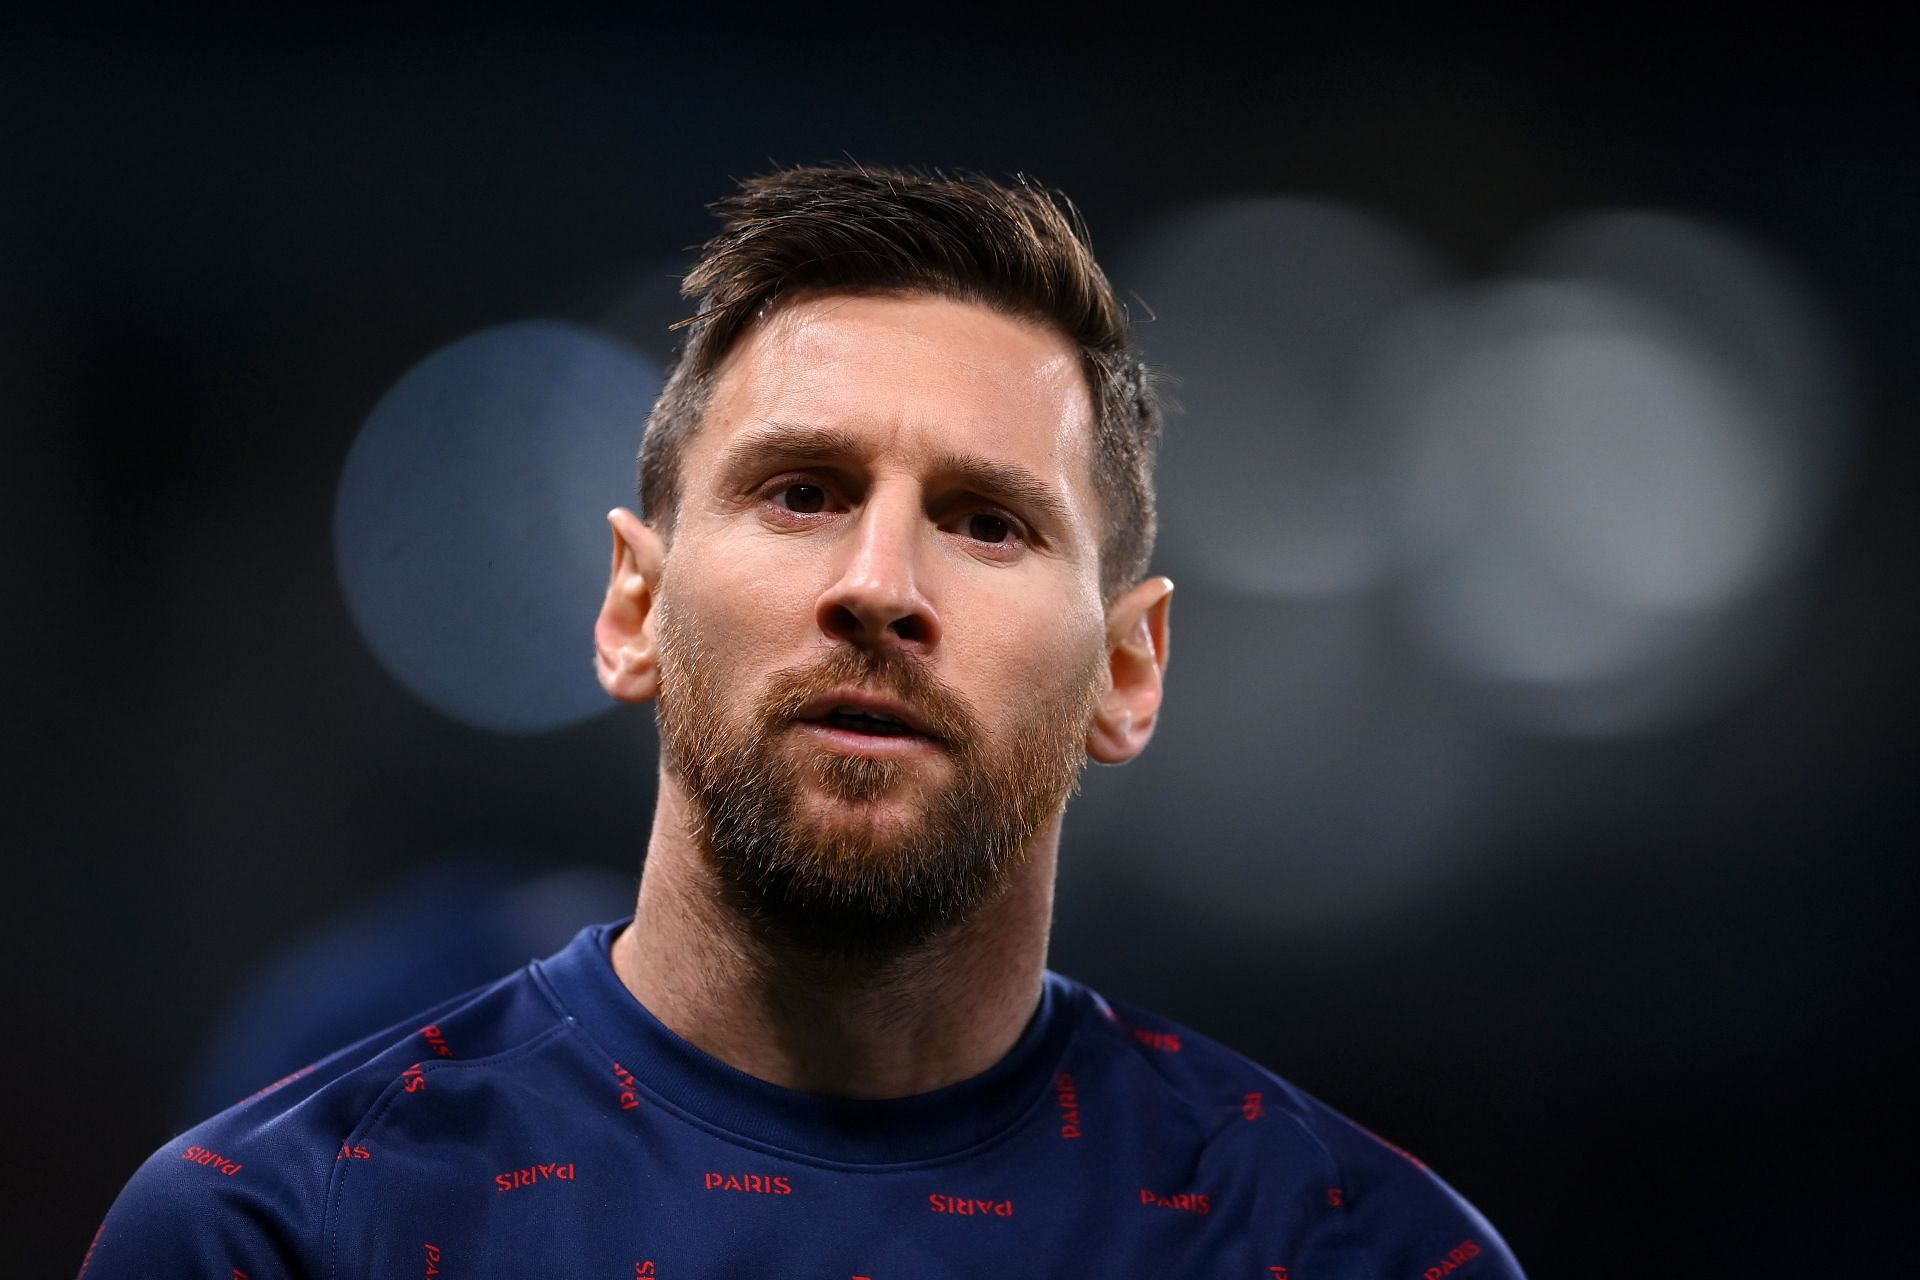 PSG Transfer News Roundup Lionel Messi to leave Parisians in 2023